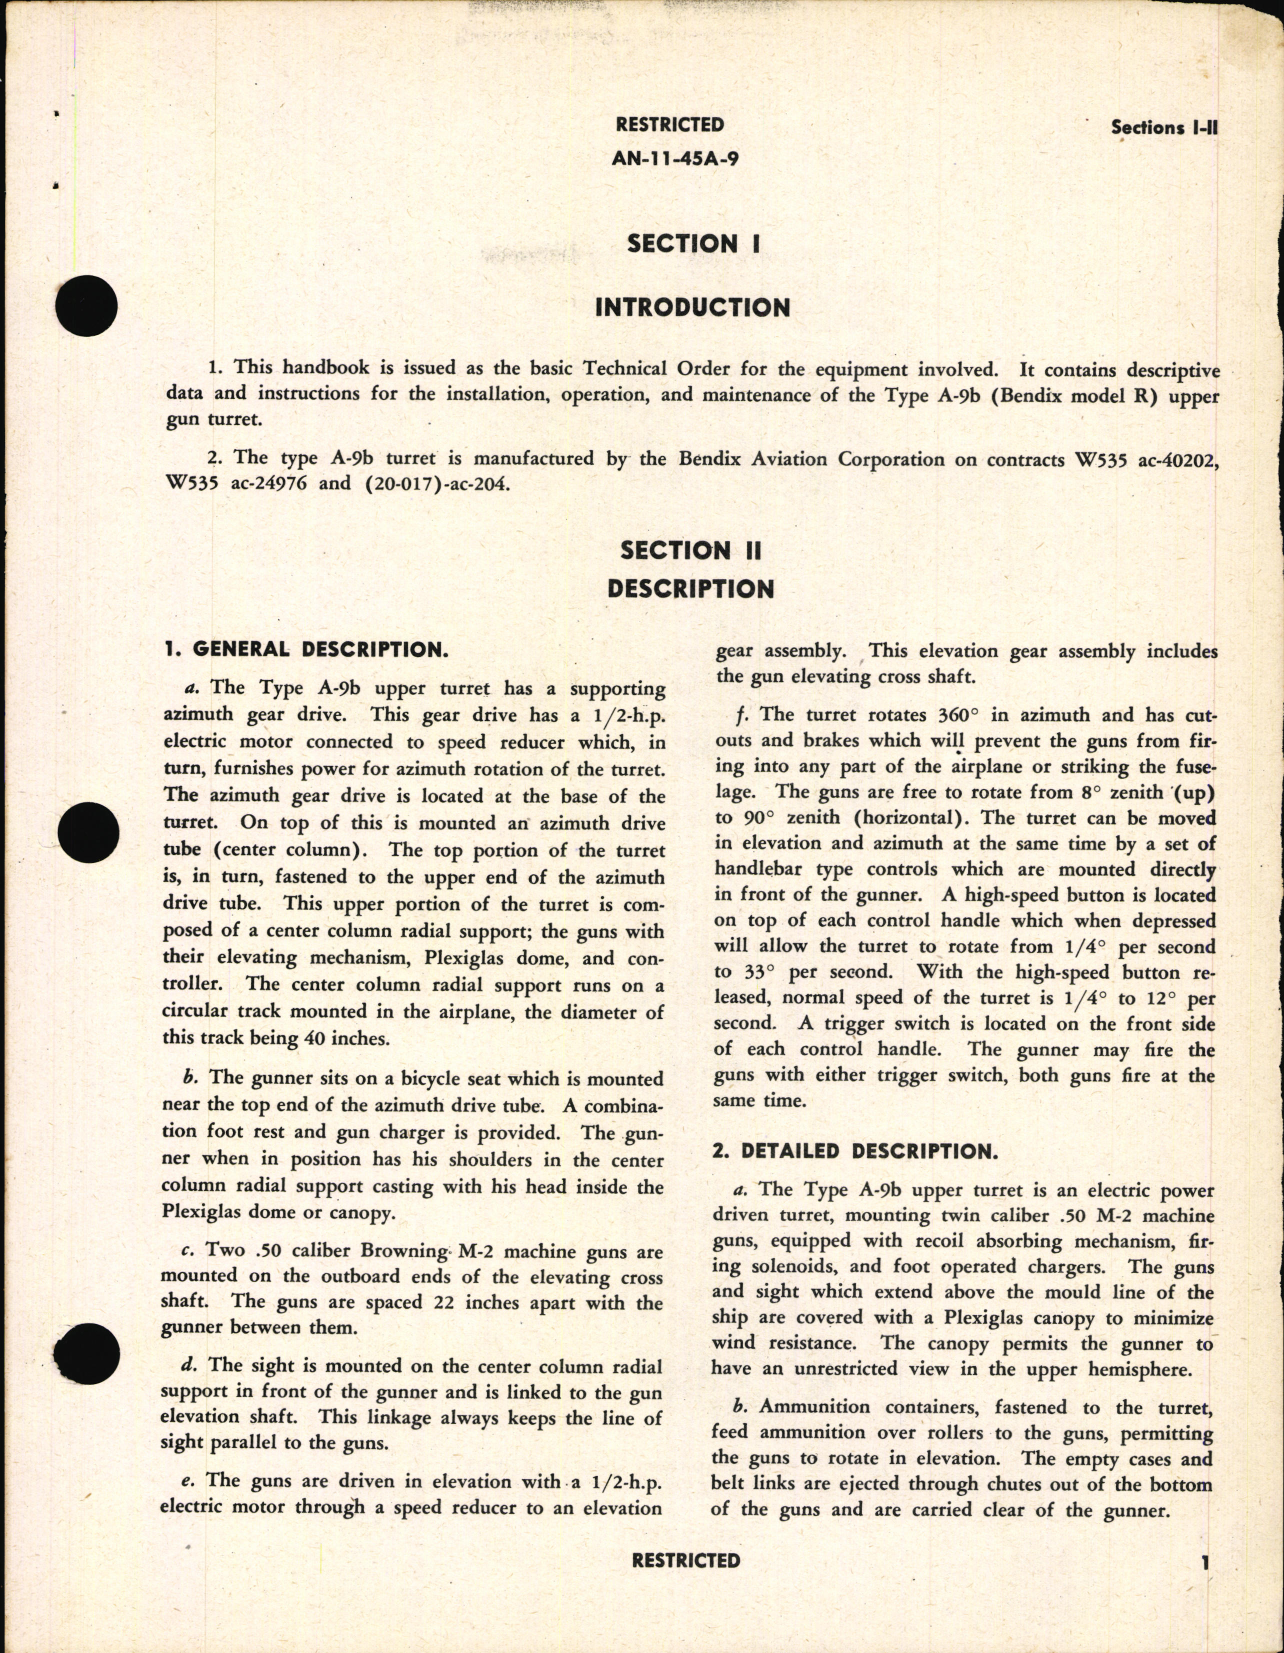 Sample page 5 from AirCorps Library document: Operation and Service Instructions for Upper Gun Turret Type A9B